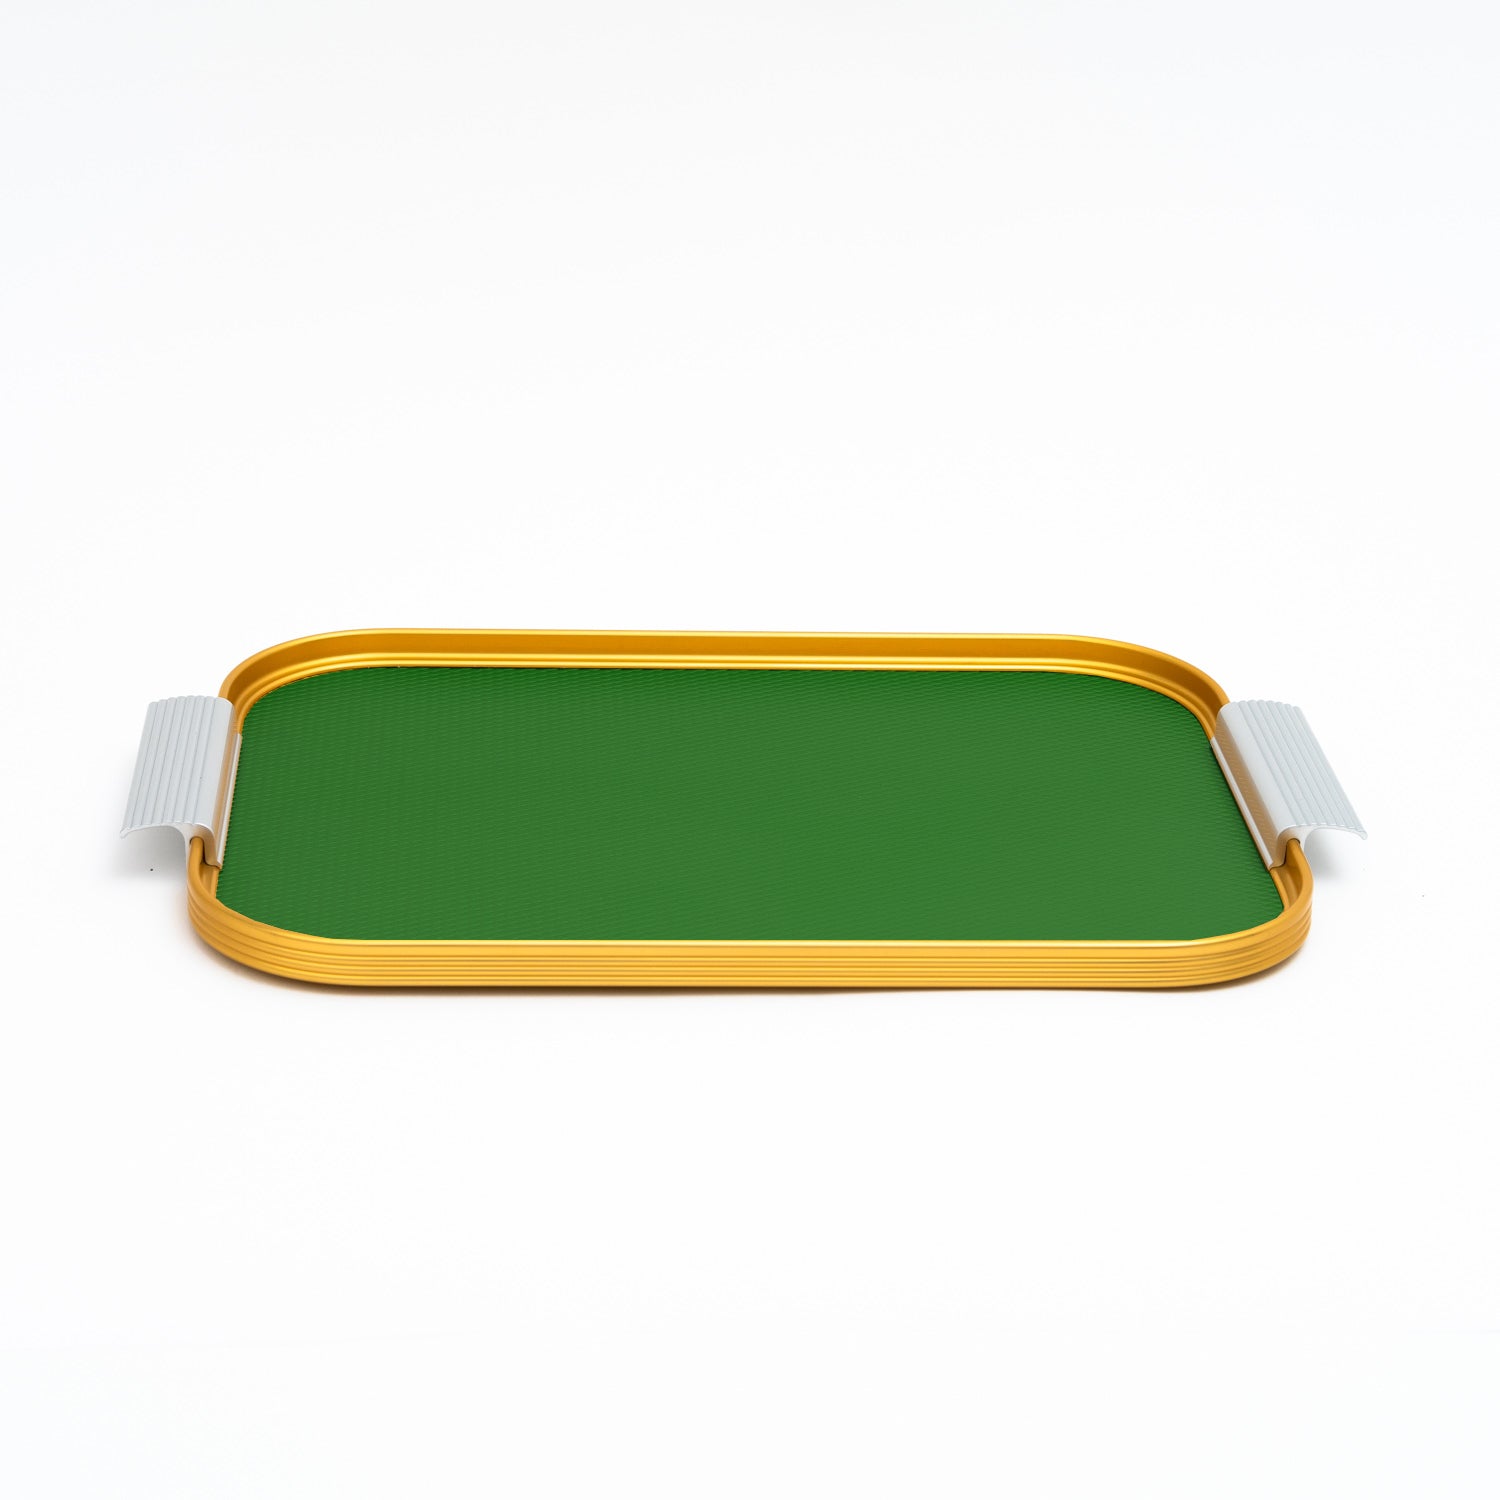 KAYMET METAL RIBBED TRAY IN SIZE S14 GREEN, GOLD AND SILVER